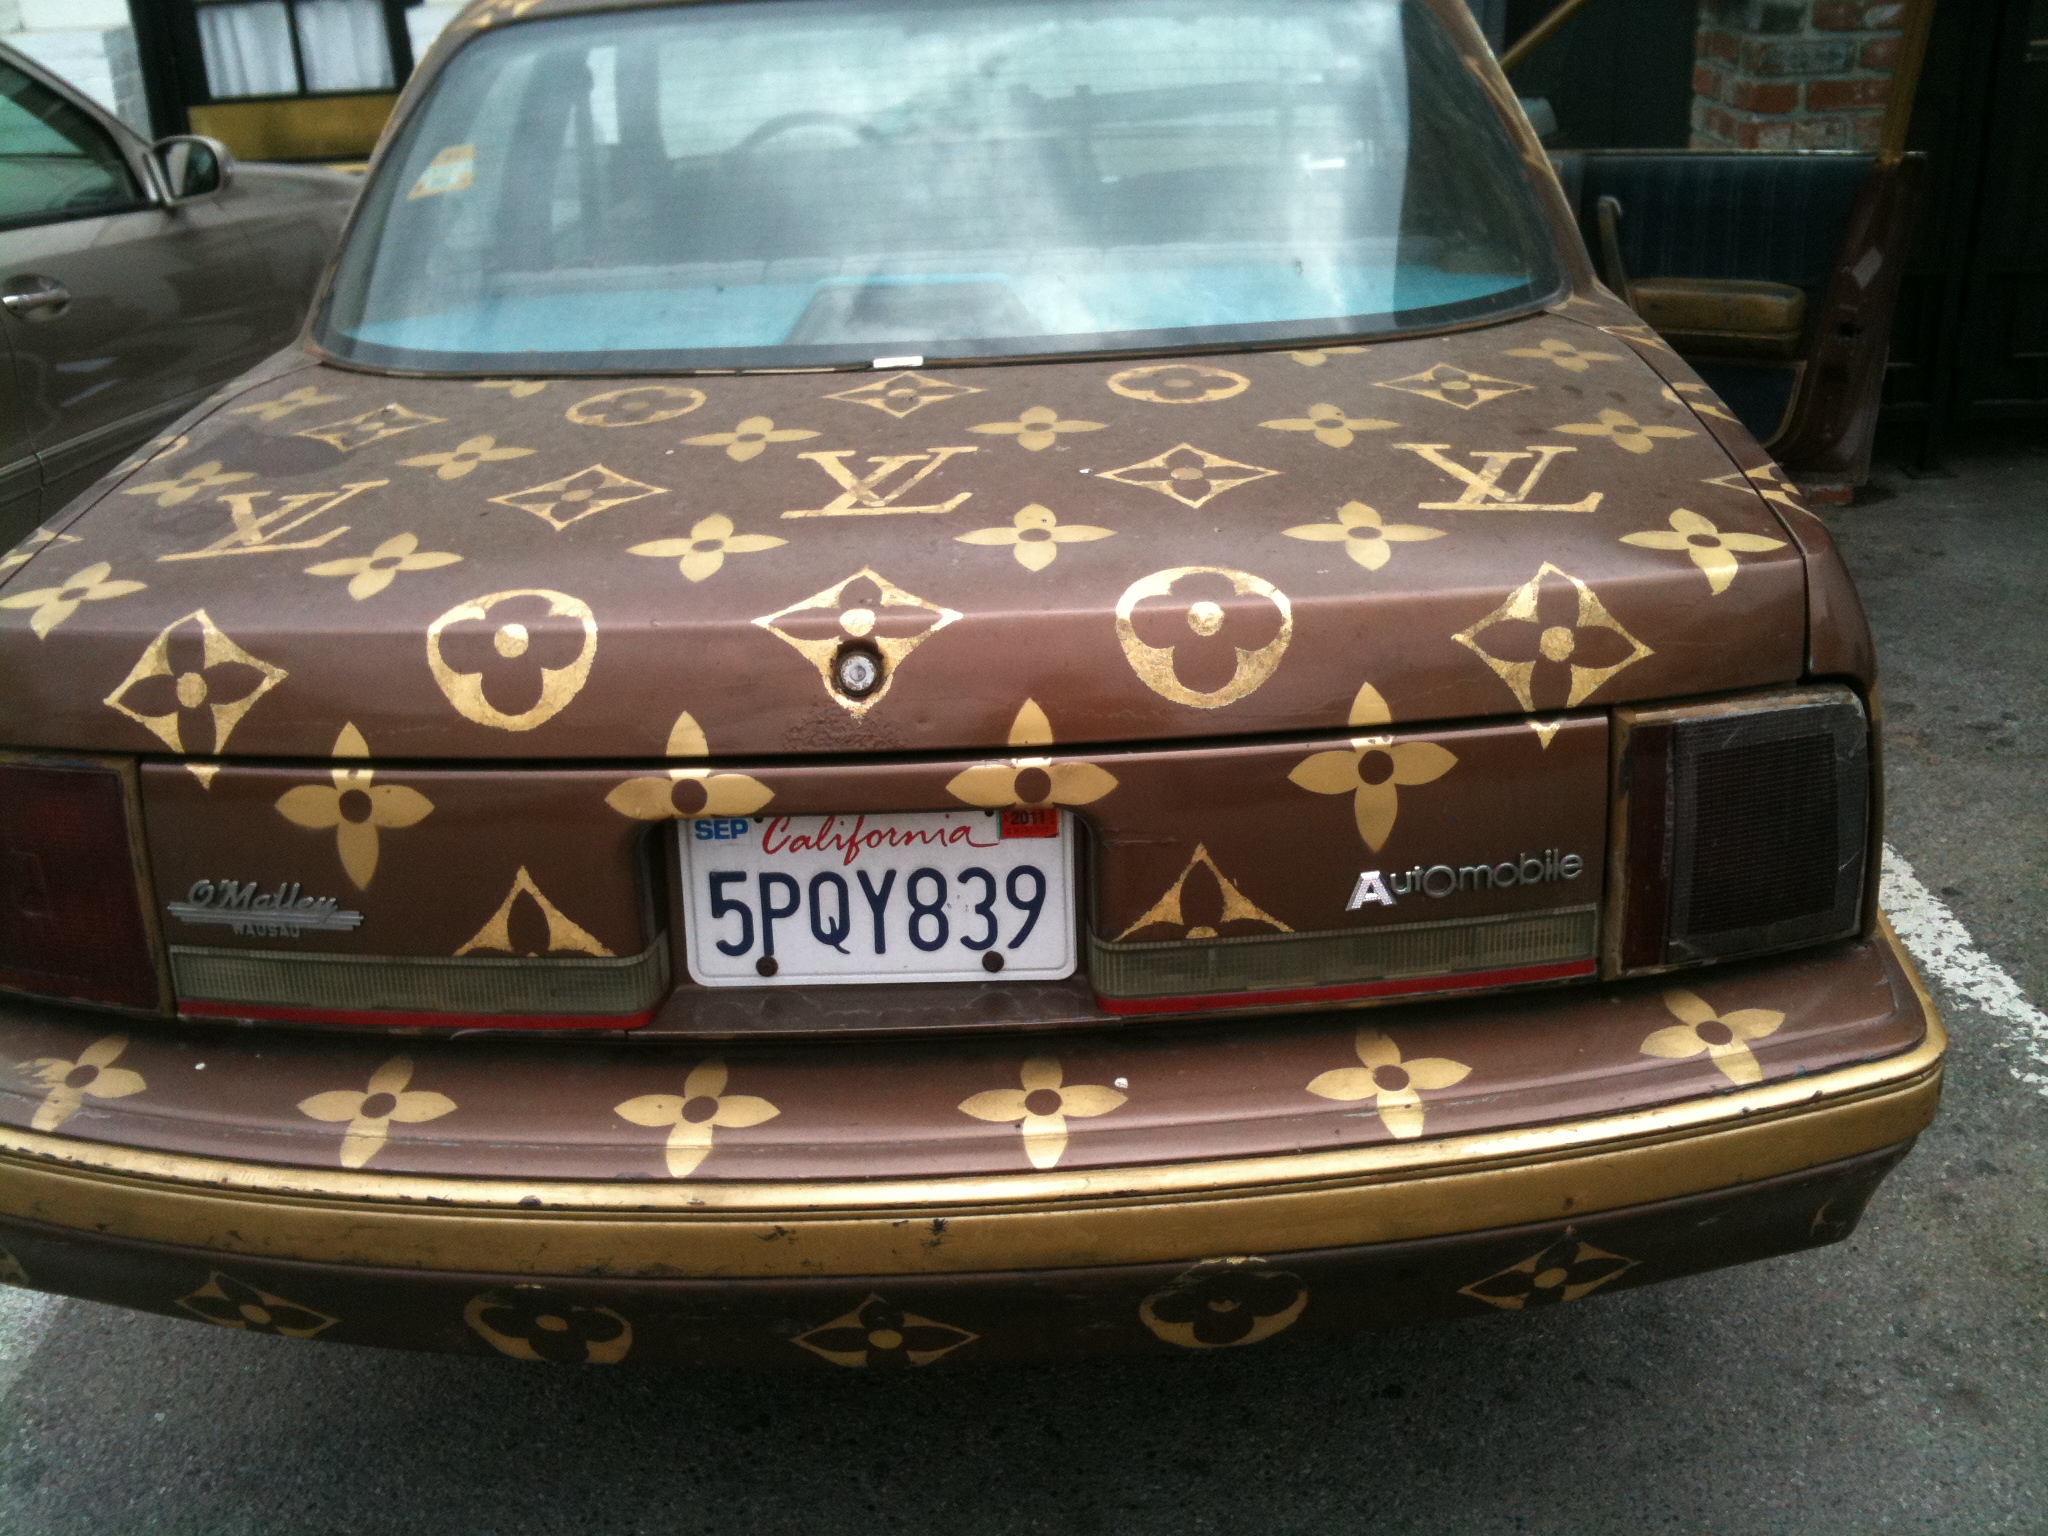 Louis Vuitton Oldsmobile – How Hideous Can It Be? | Todd Bianco's  ACarIsNotARefrigerator.com Blog